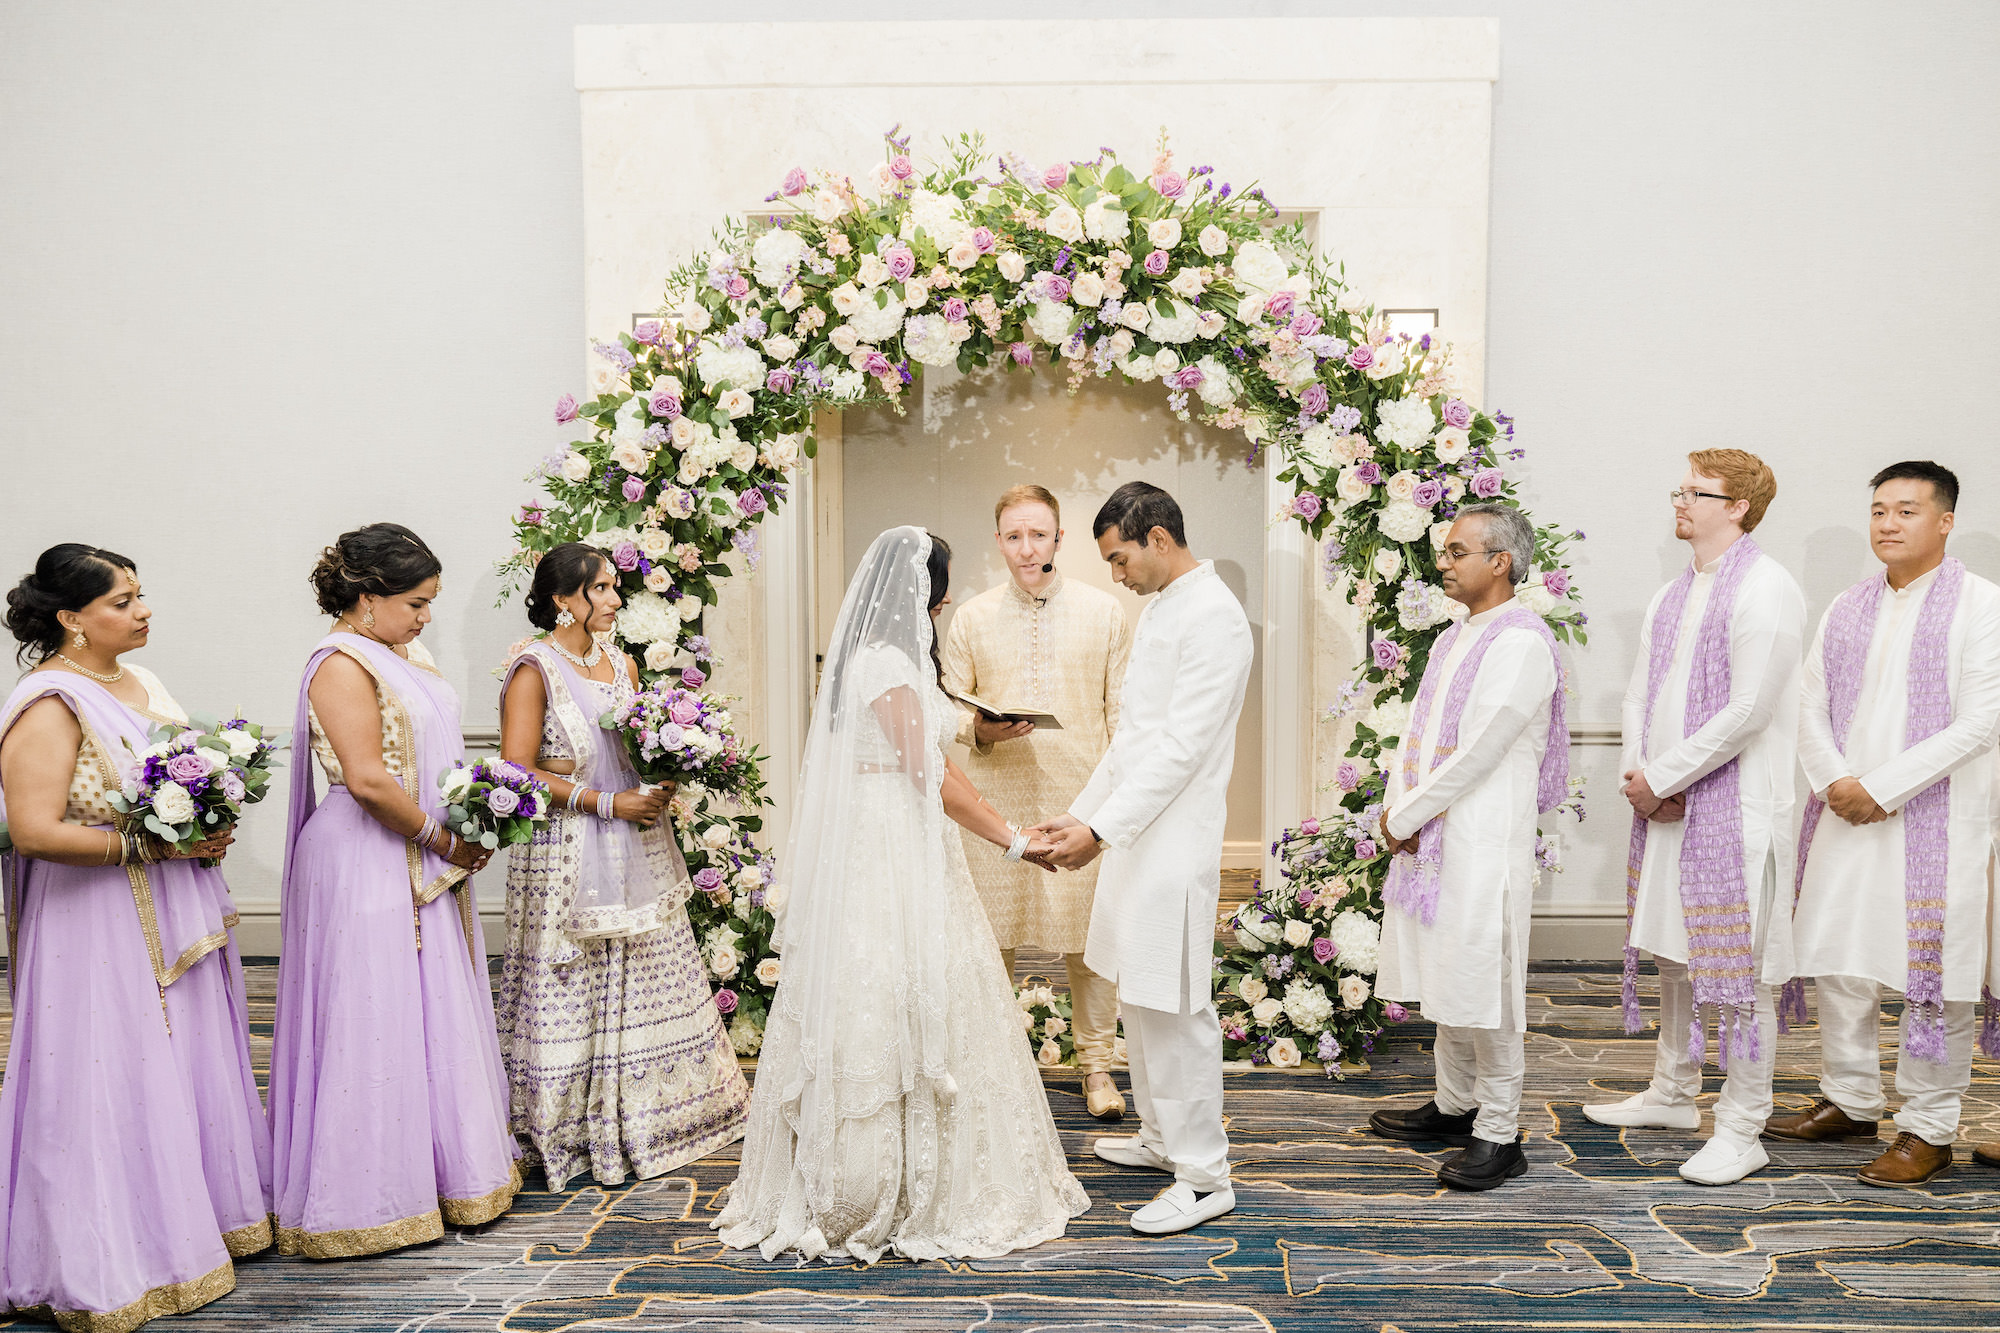 Bride and Groom Vow Exchange | Round Flower Arch Ideas with Purple and Blush Roses, White Hydrangeas, and Greenery | Lavender Indian Wedding Ceremony Inspiration